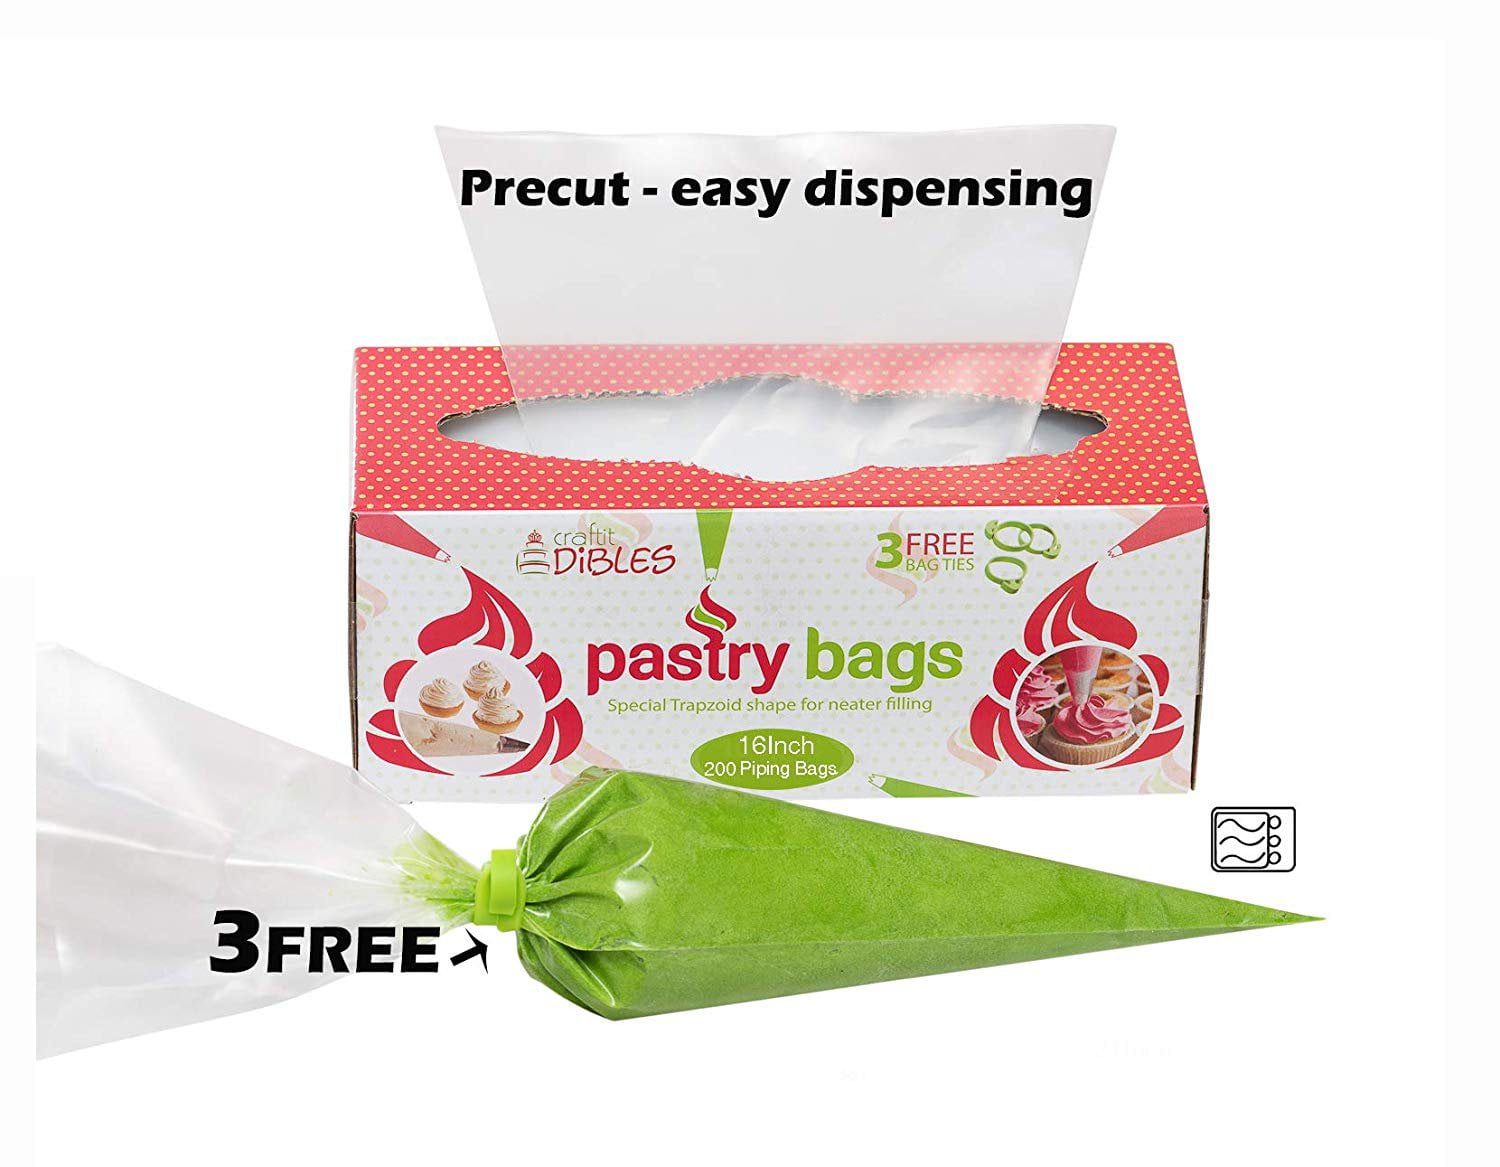 Extra Thick Frosting Bags Microwave safe by CiE Craftit Edibles DB-06 Piping Bags Disposable 200 Pack 16 Inch Cake Decorating Pastry Bag Set in Dispenser box With 3 Free Icing Bag Ties 